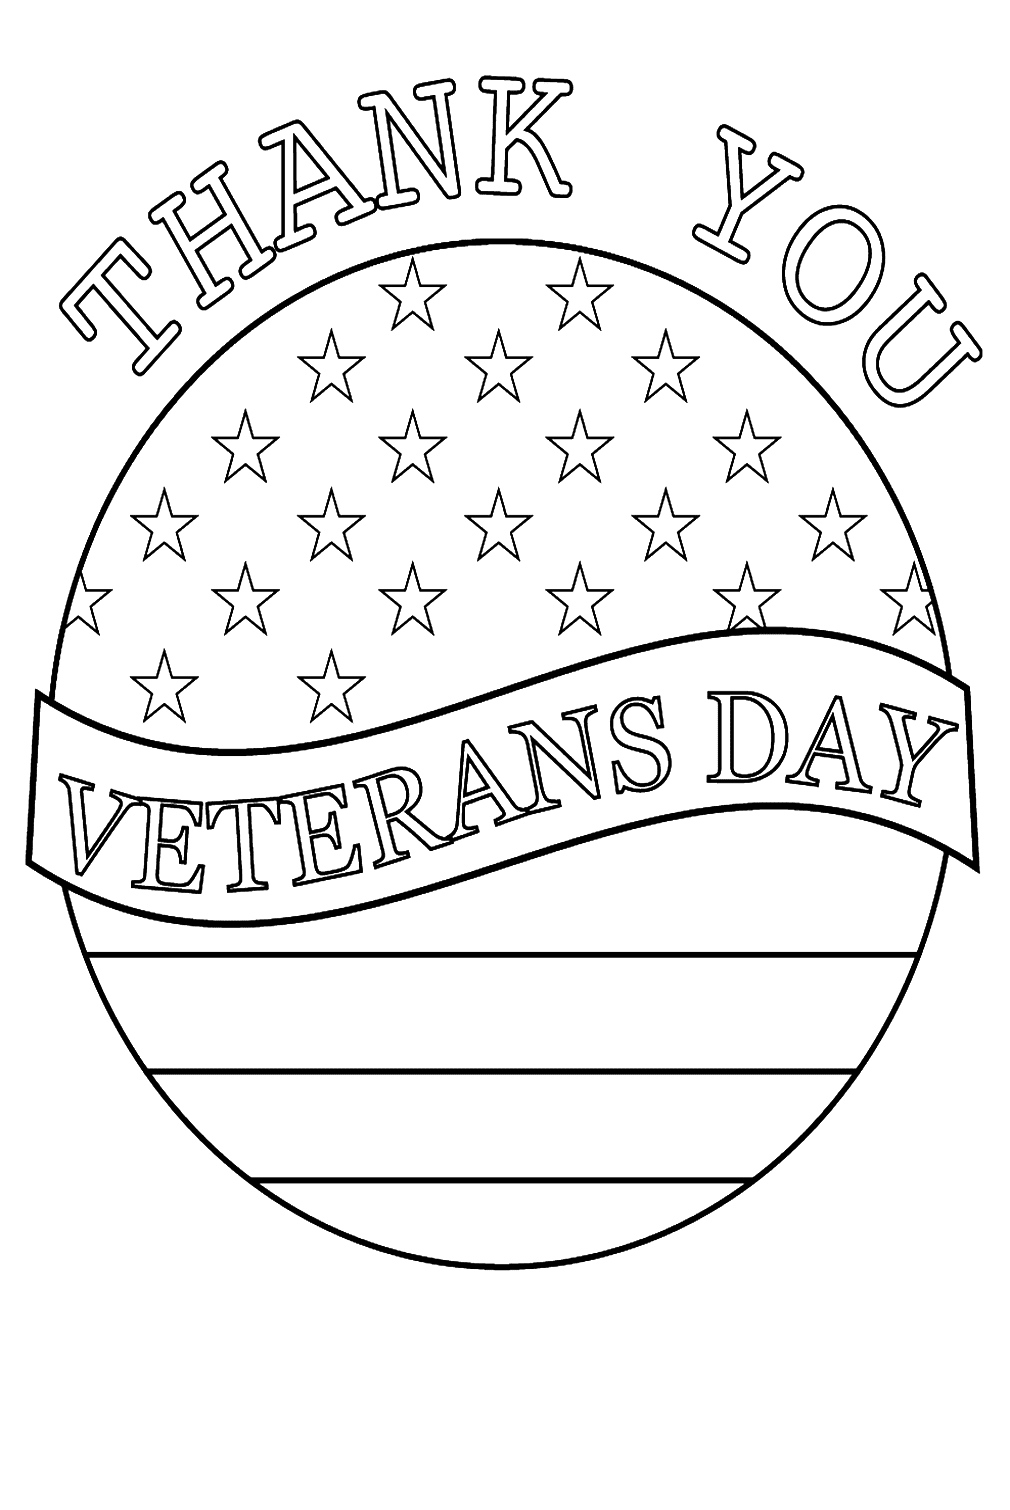 Thanking our Veterans Coloring Page